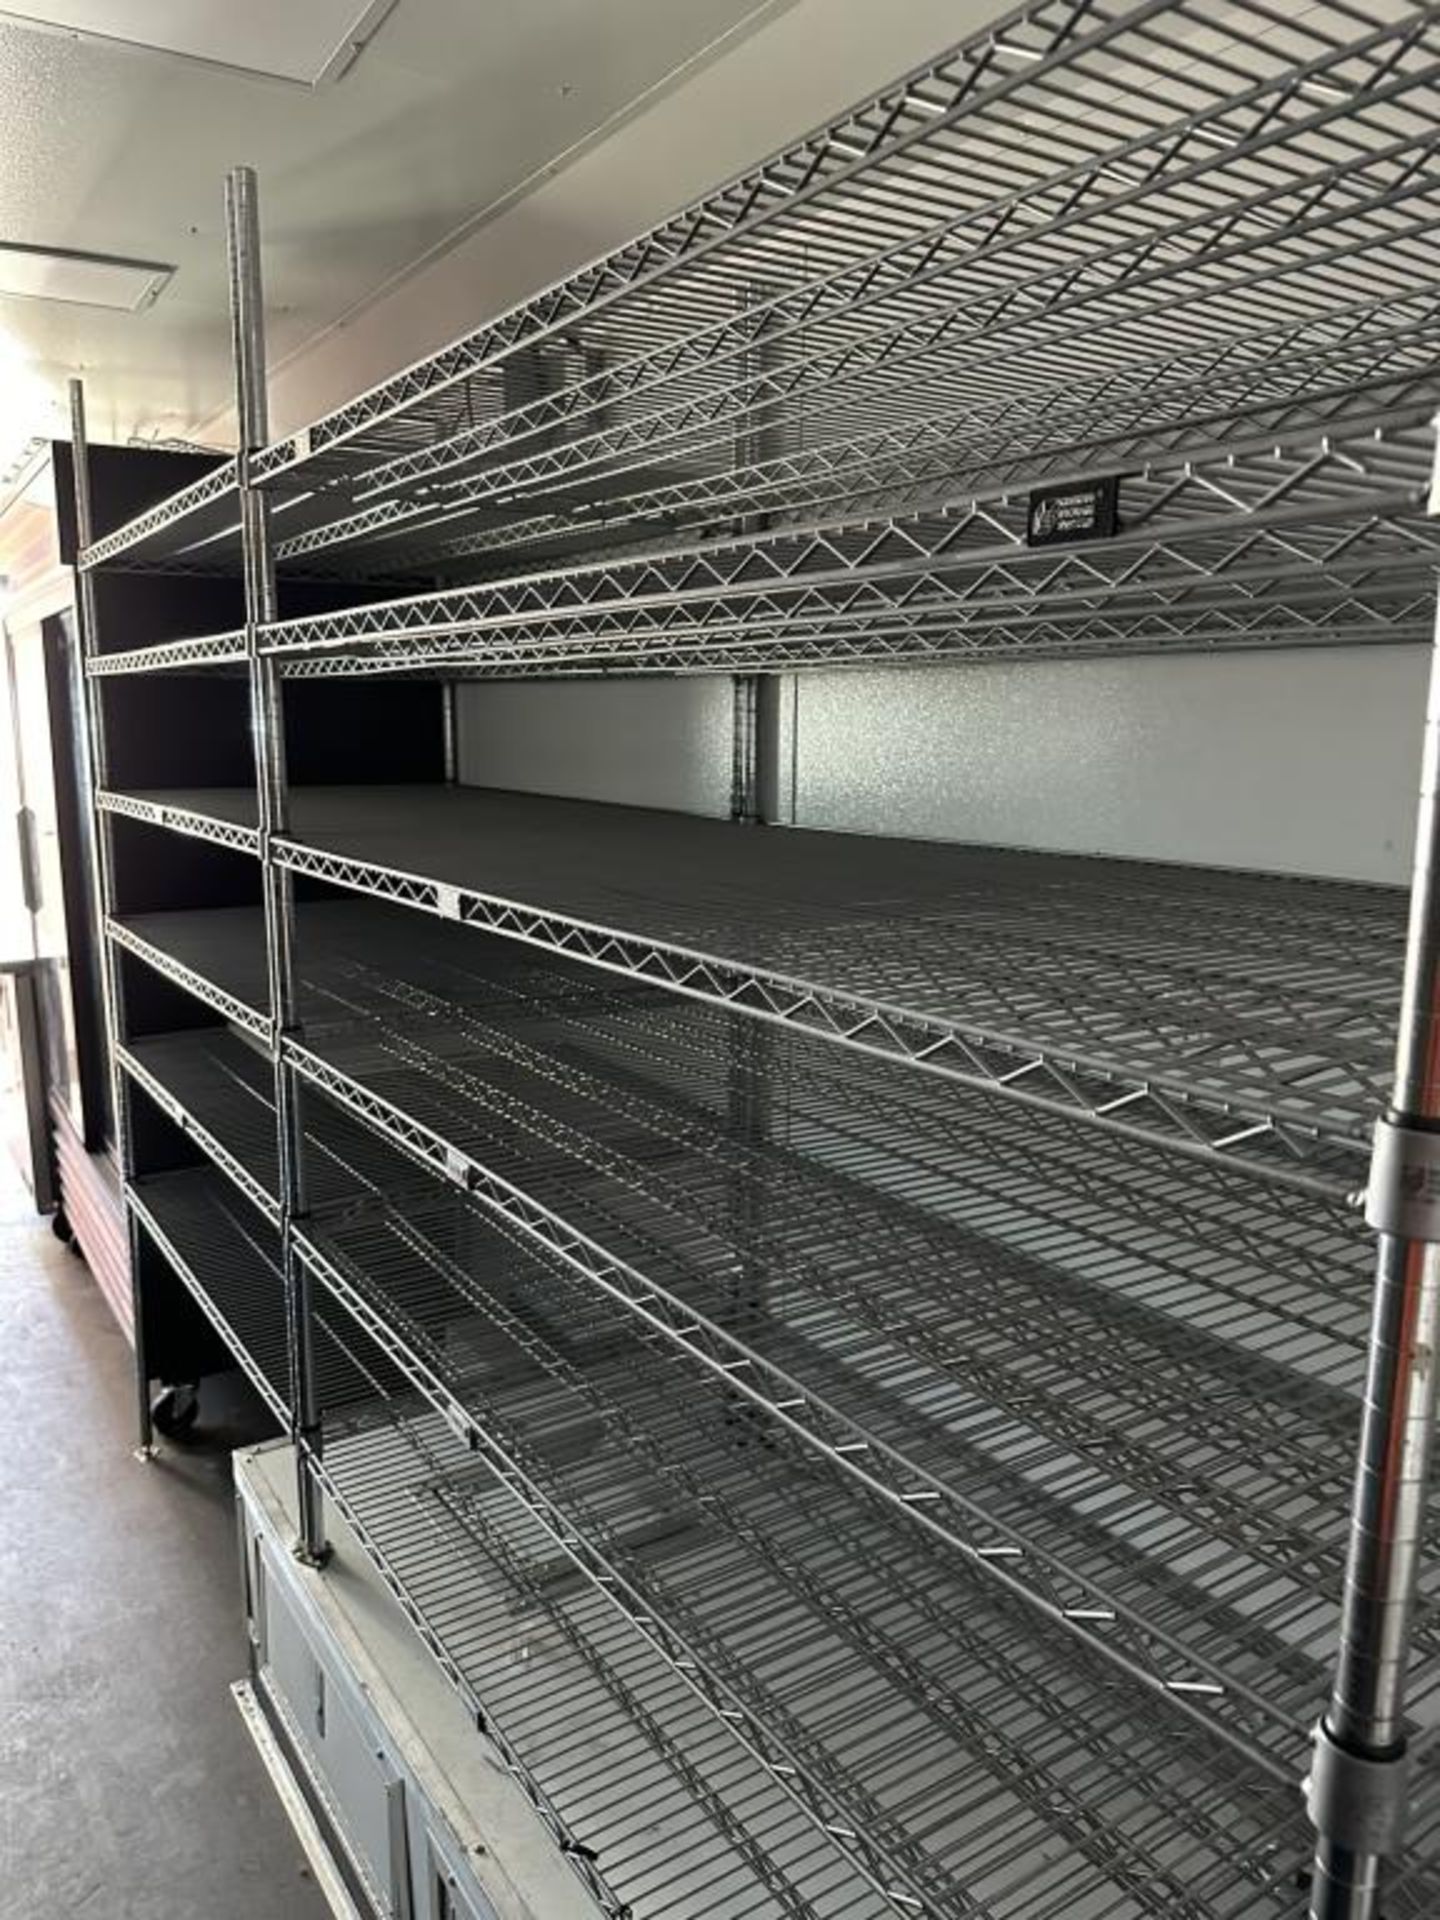 2021 Food Service Support Trailer - Image 16 of 20